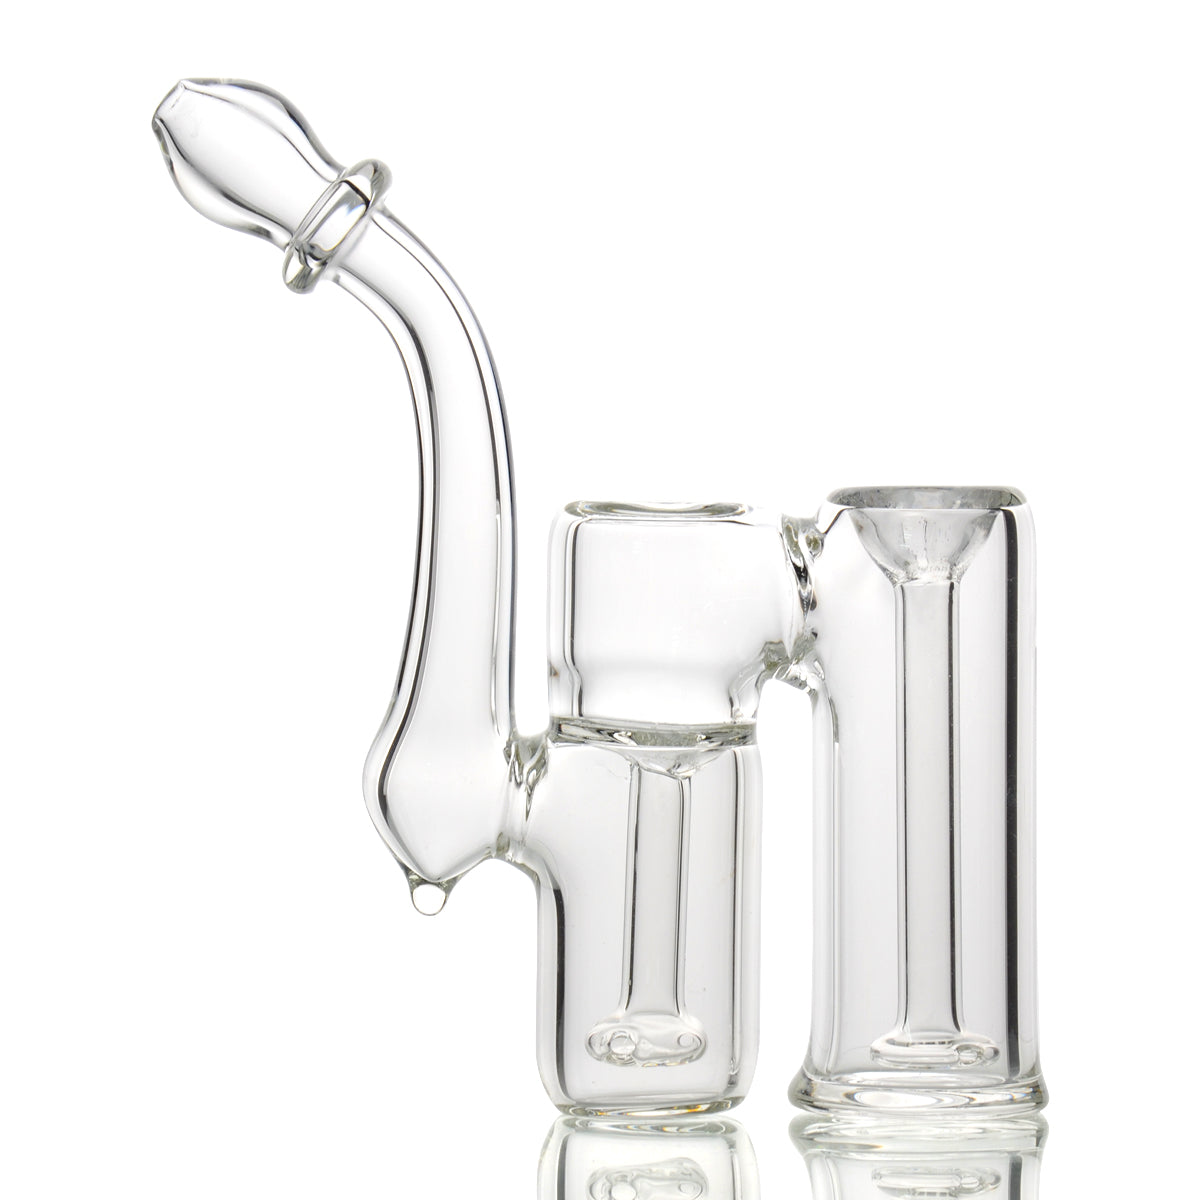 6" Clear Glass Double Chamber Bubbler Approx 200 Grams